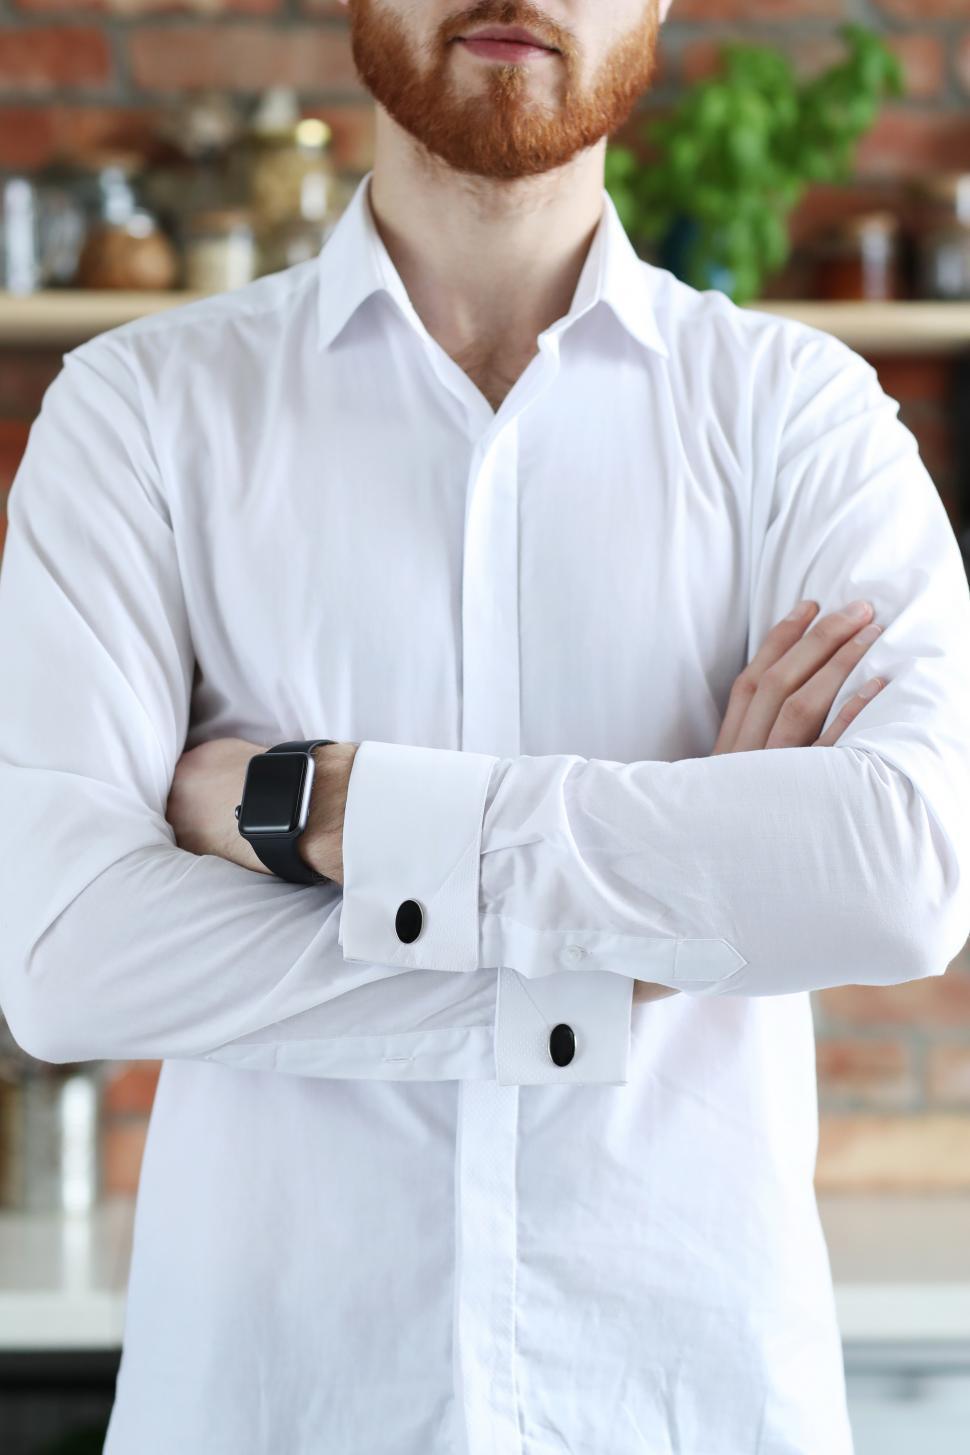 Free Image of Man in white shirt with arms crossed 